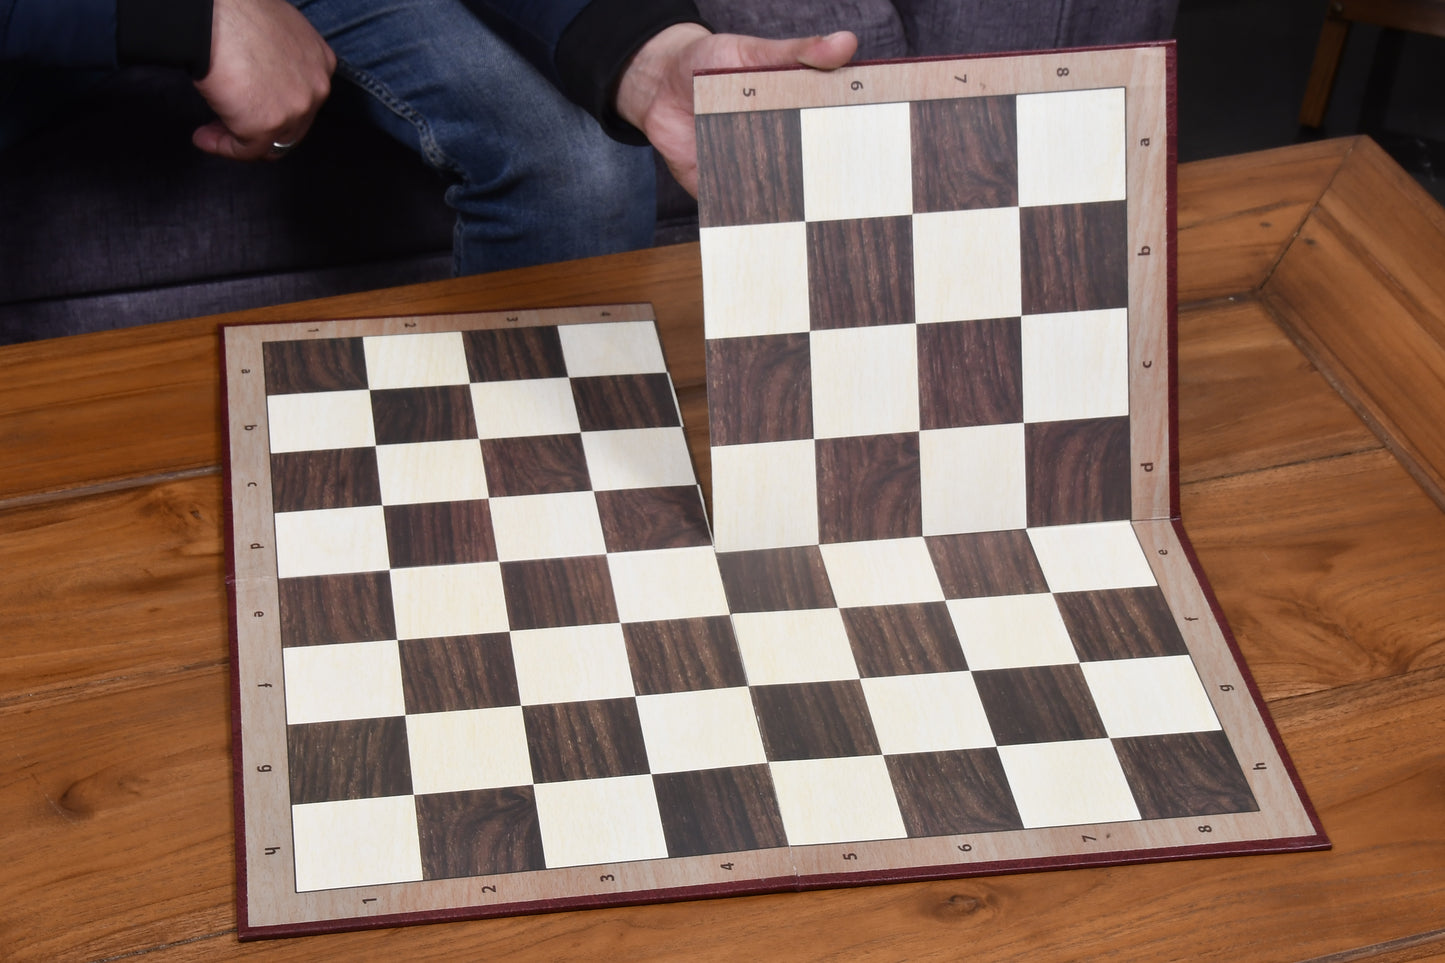 Combo of The Blitz Series Plastic Chess Pieces Dyed in Sandalwood and Chocolate Brown - 3.8" King with Folding Chess Board